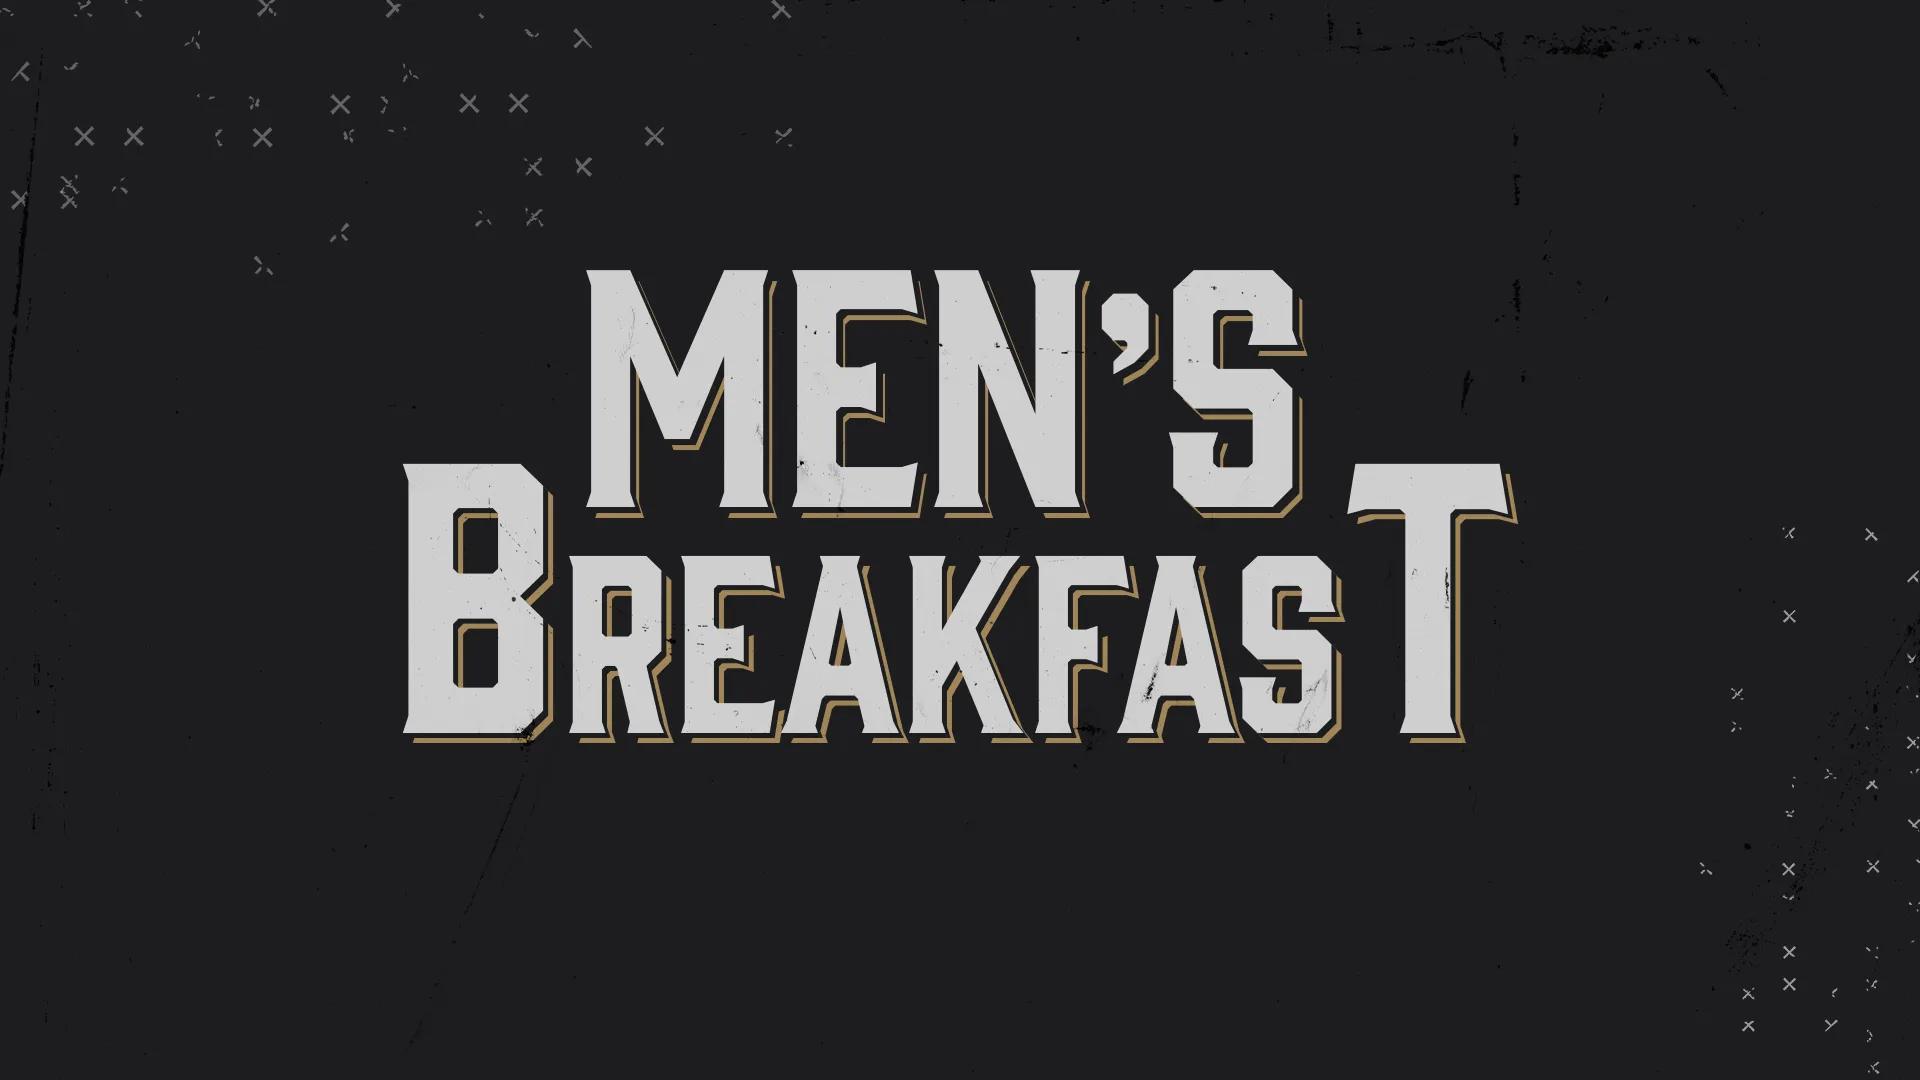 Kick-start your morning with fellowship and good food using this 'Men's Breakfast' church graphic. The rugged, grunge-inspired design is perfect for inviting the men of your congregation to a time of bonding and spiritual growth over breakfast.